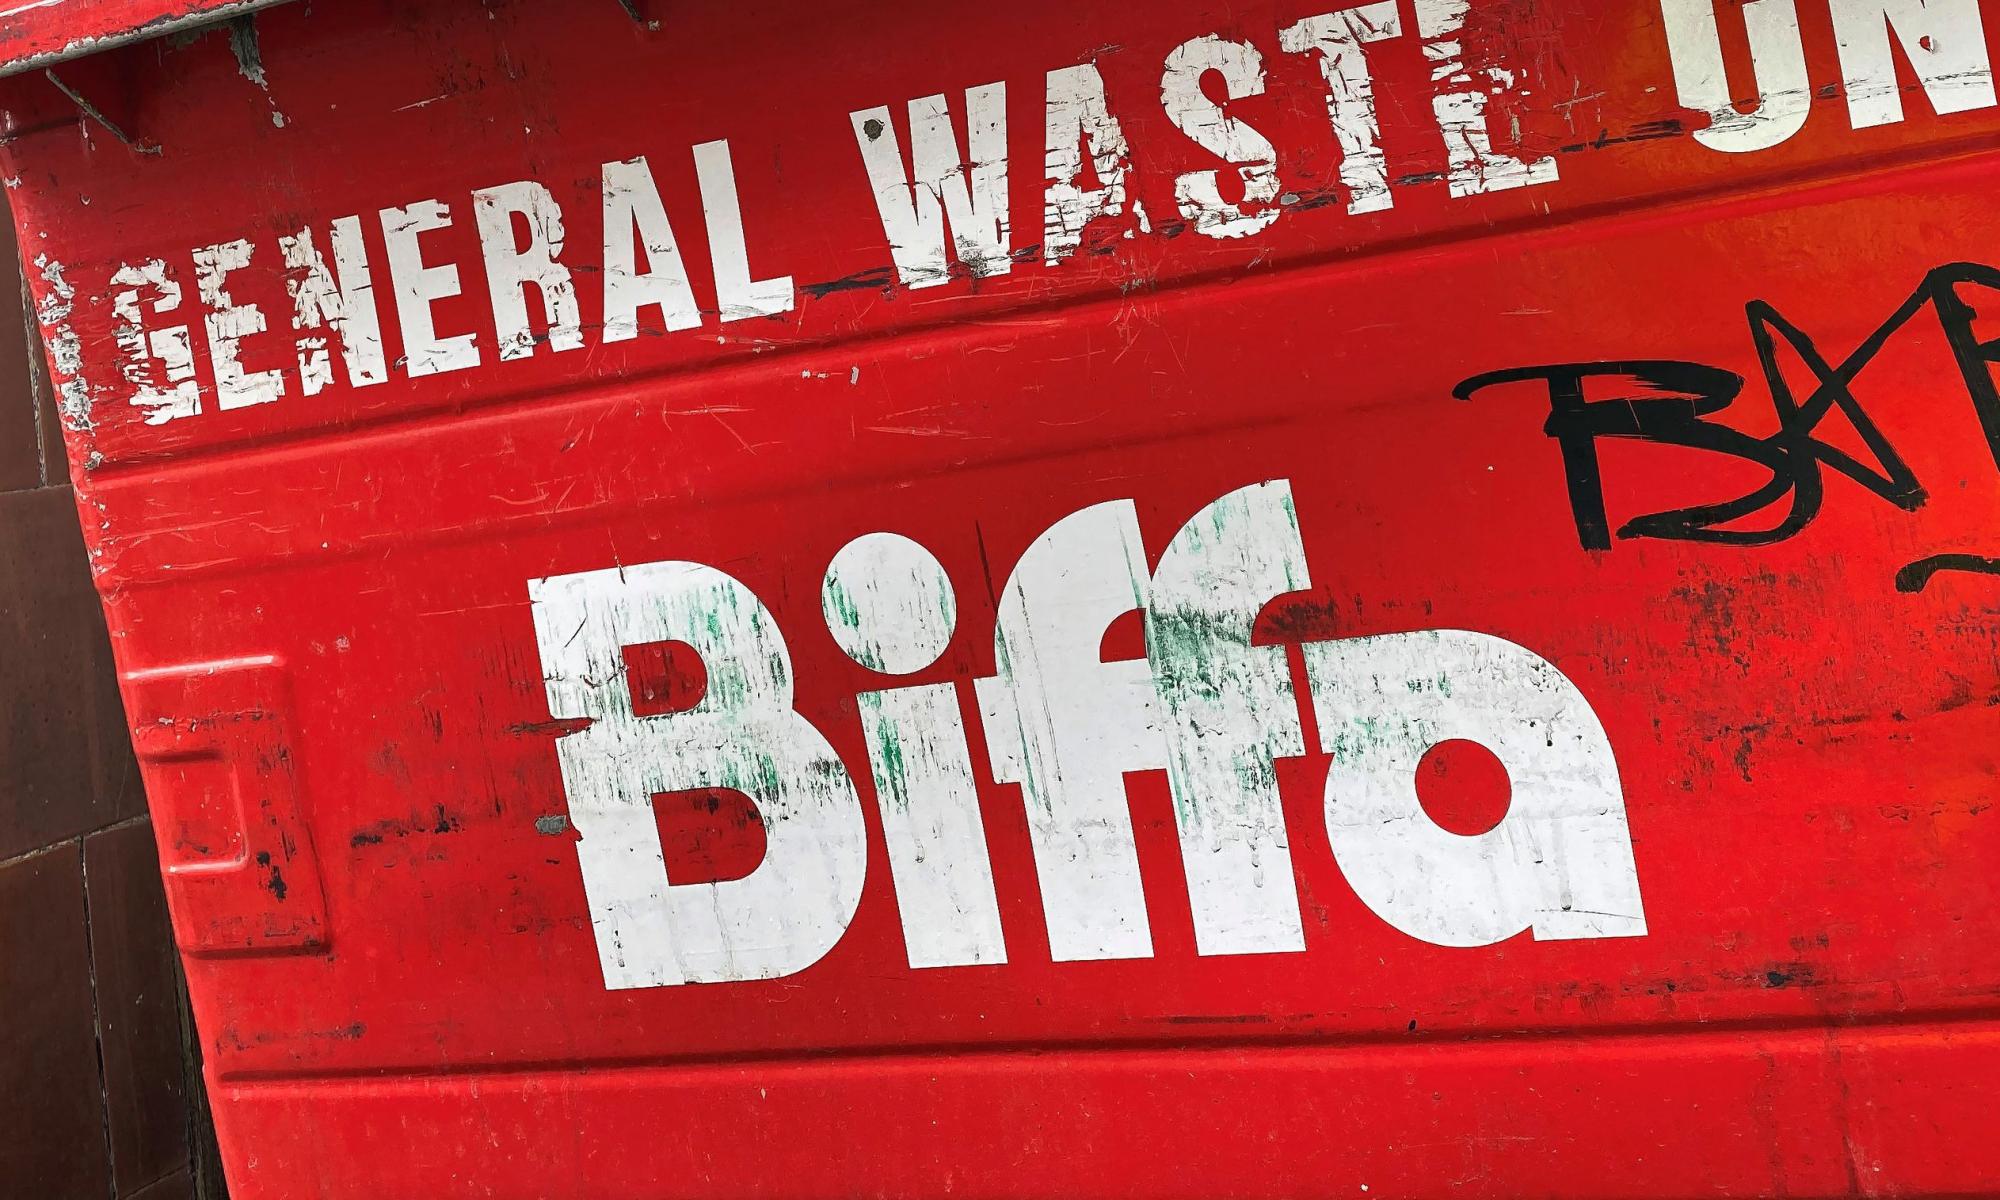 UK waste firm Biffa loses appeal after exporting dirty waste to China